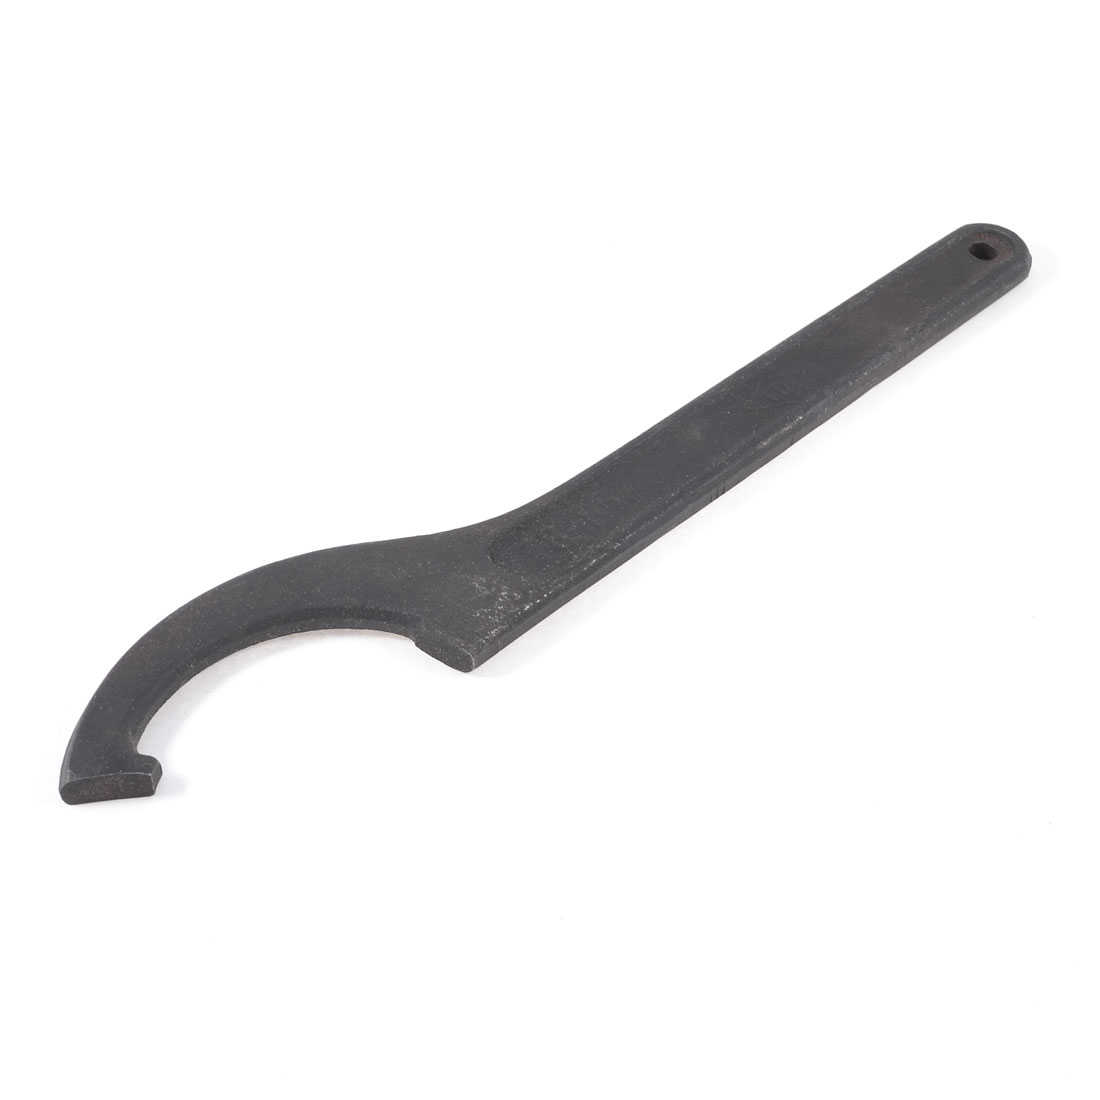 Unique Bargains 78-85mm Opening Dia Carbon Steel Hook Spanner Wrench Black 260mm x 35mm